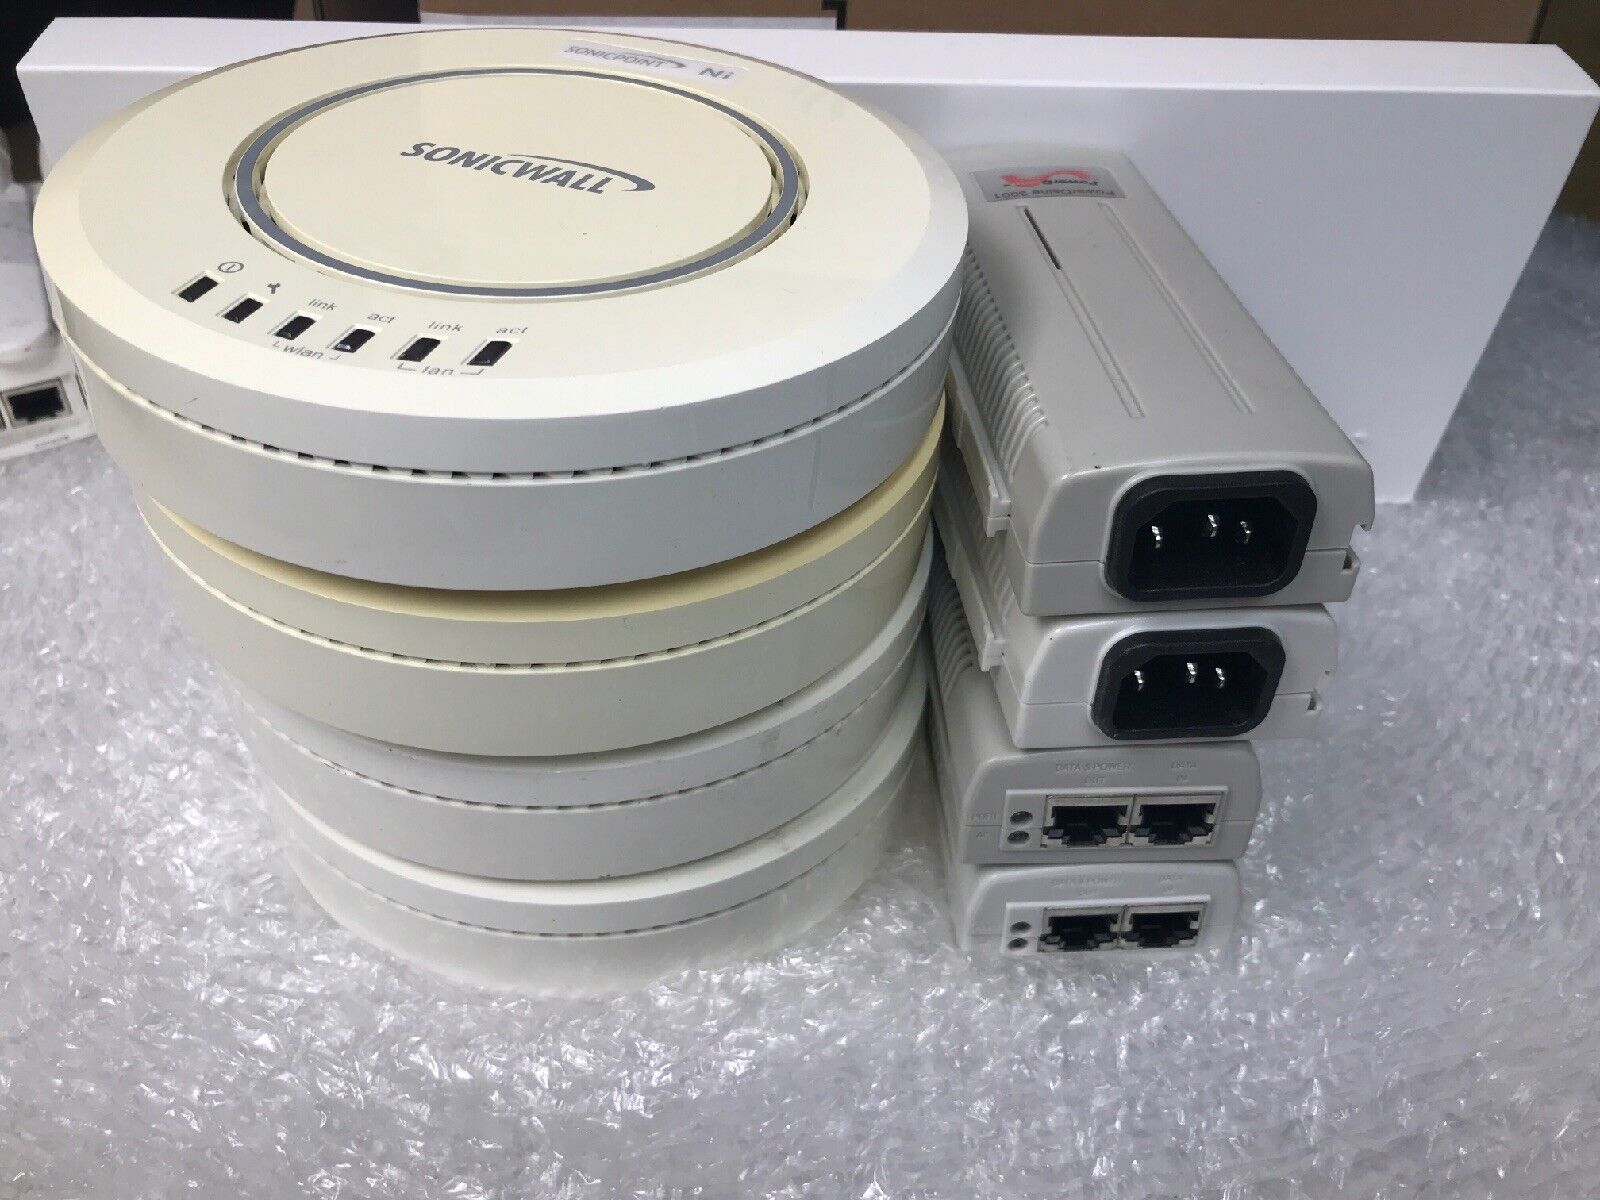 1x SonicWALL Sonicpoint Ni Wireless Access Point APL21-083 (transferable)